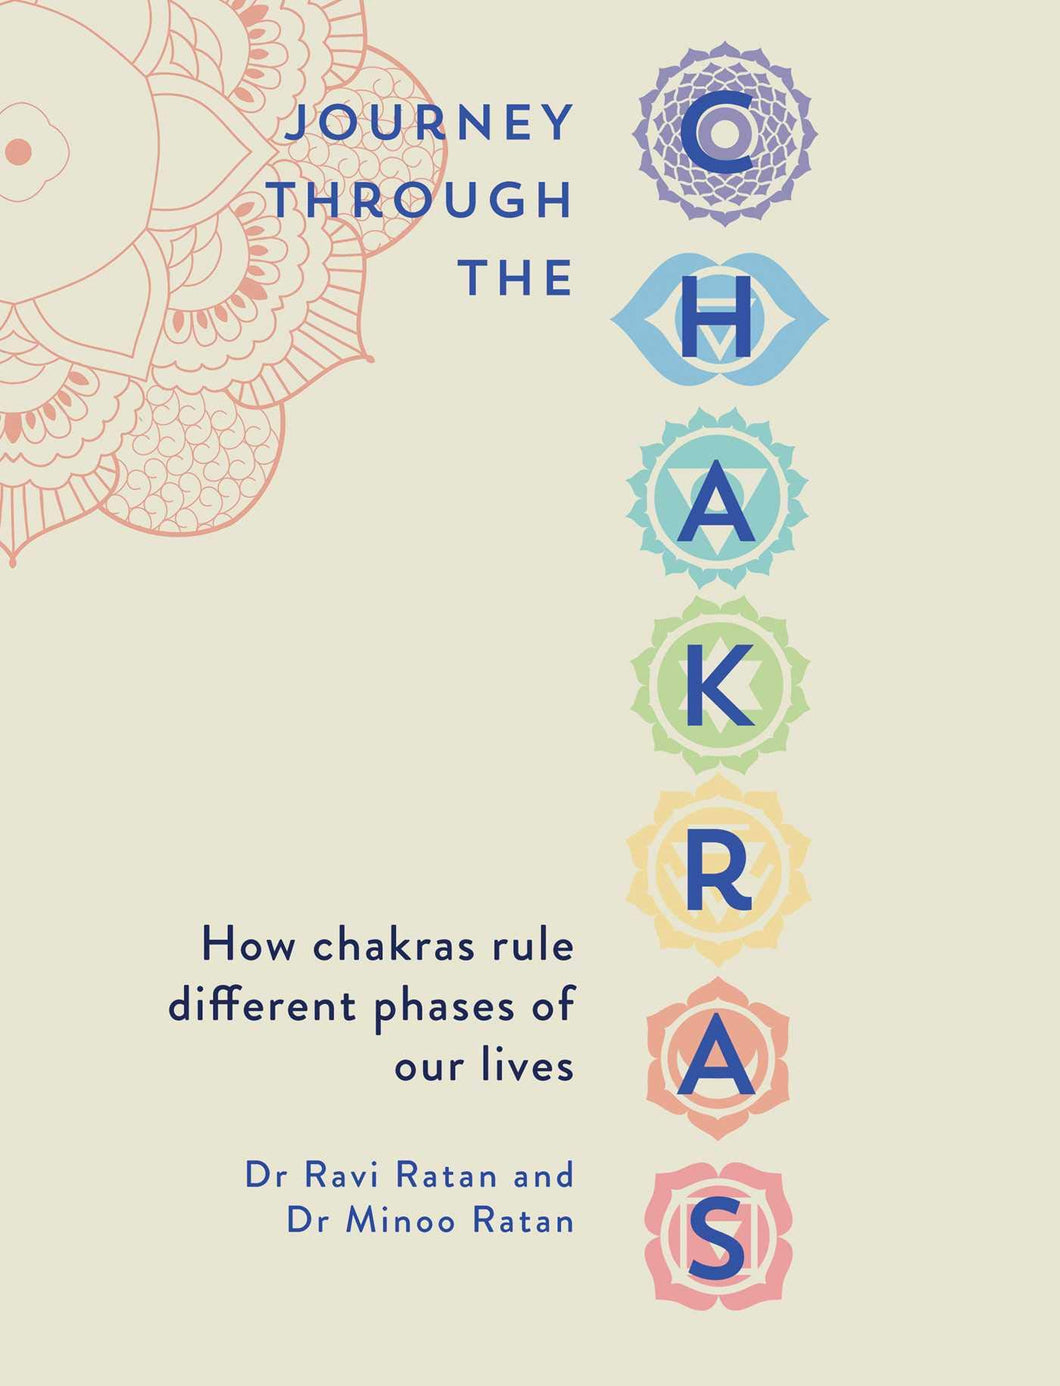 Journey Through the Chakras: How Chakras Rule Different Phases of Our Lives